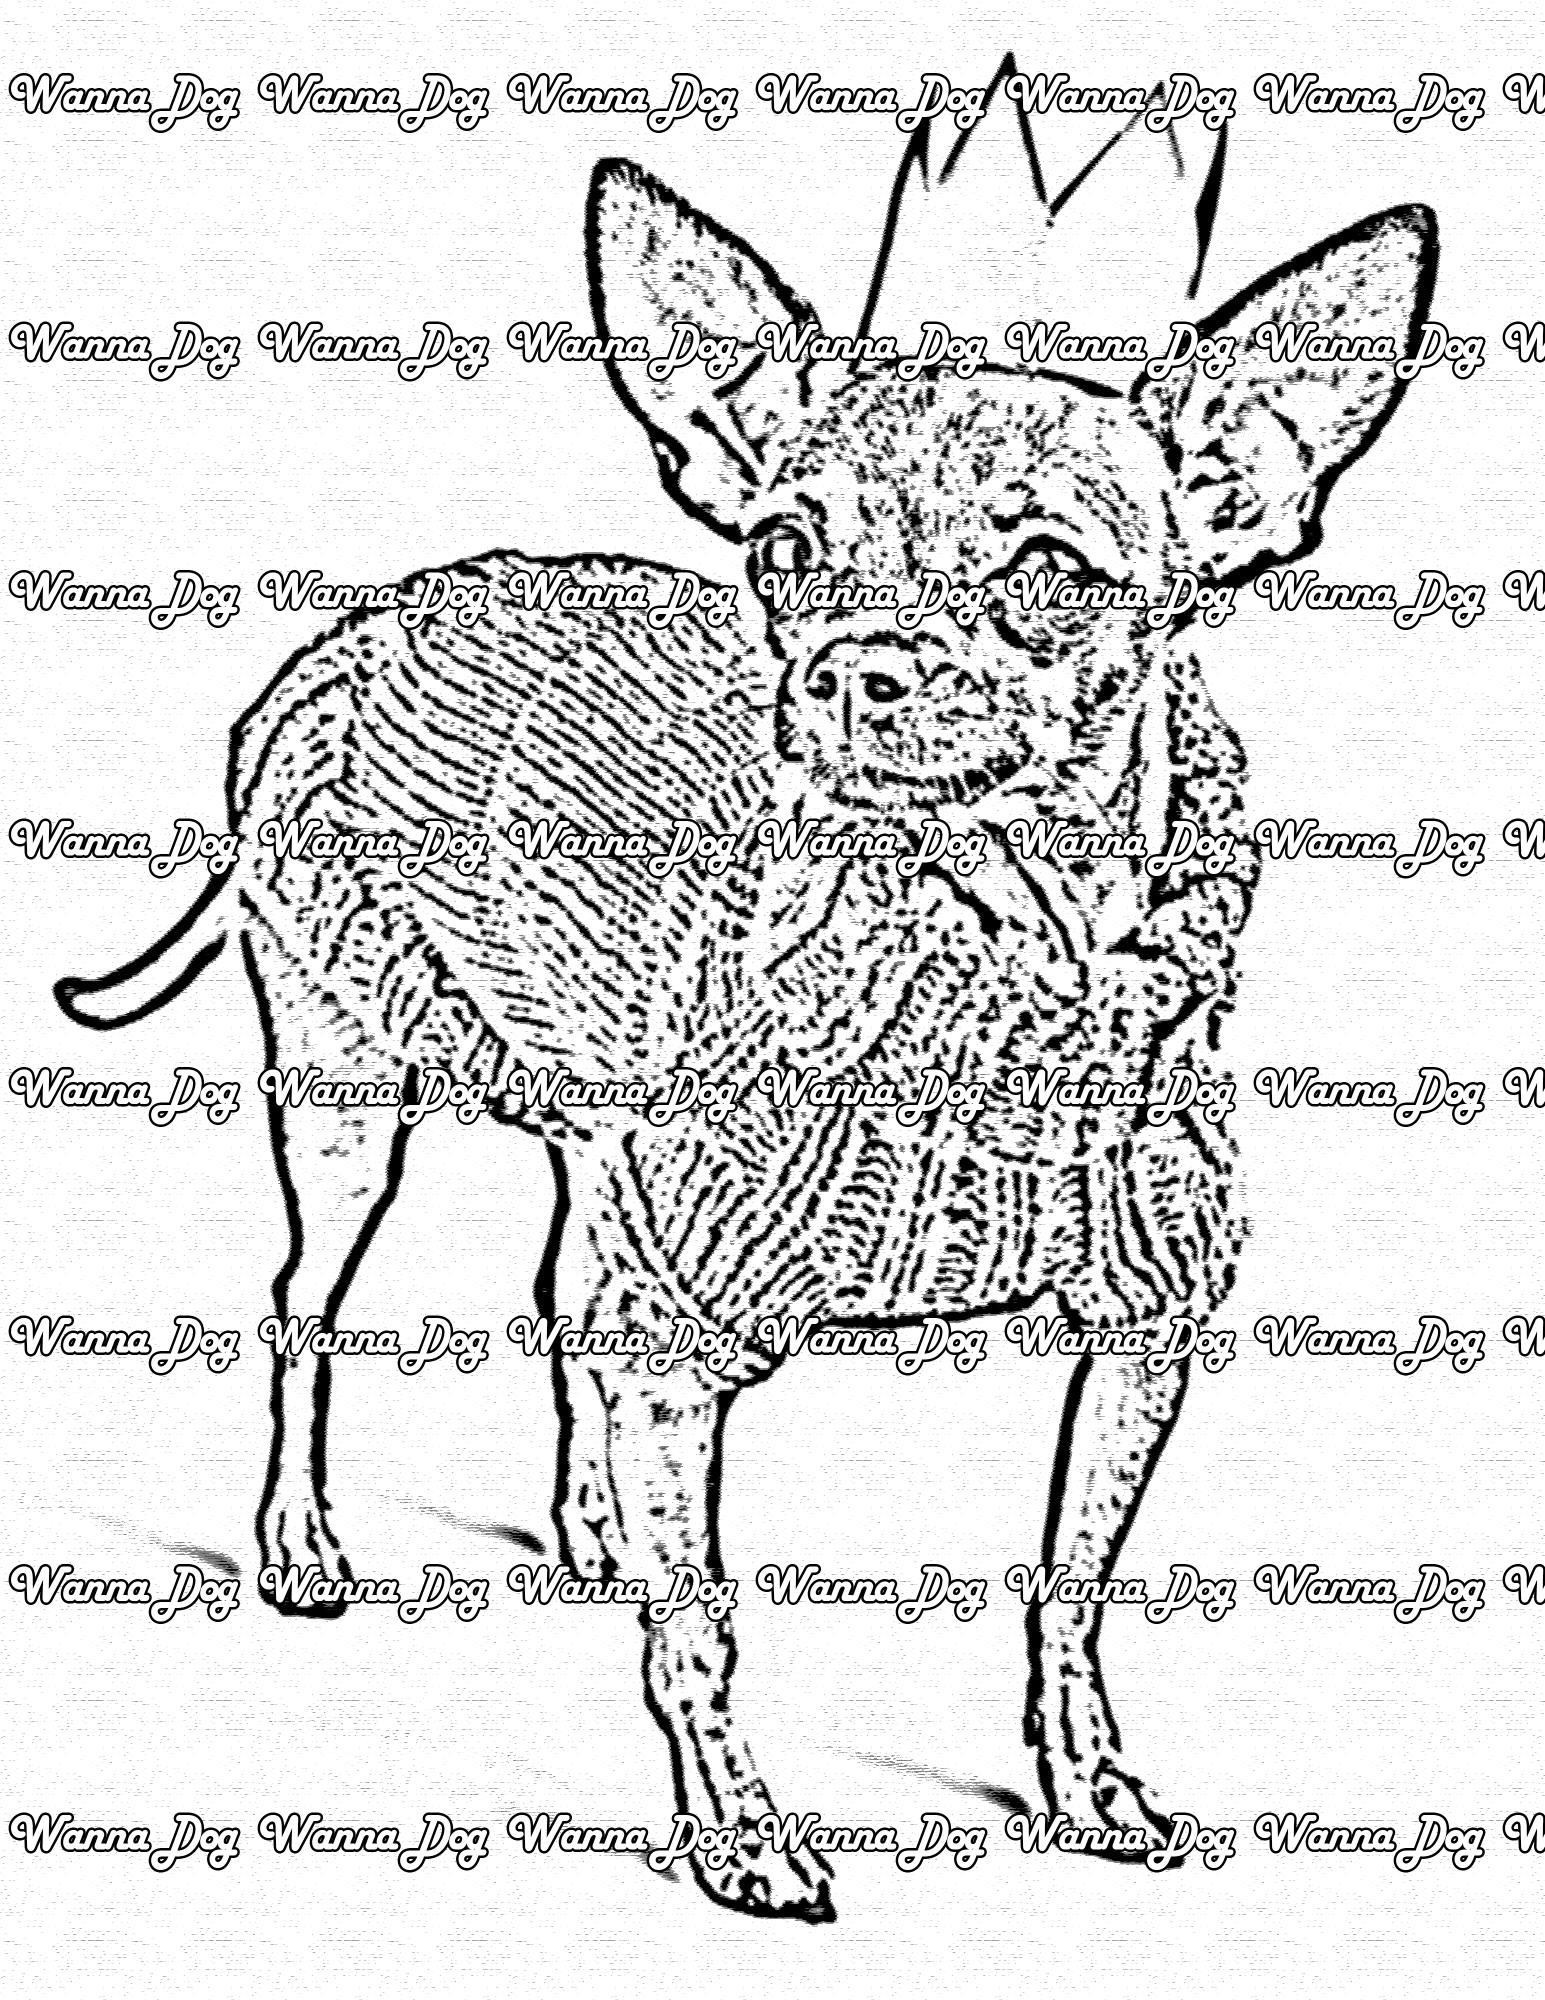 Chihuahua Coloring Page of a Chihuahua in a paper crown and a sweater